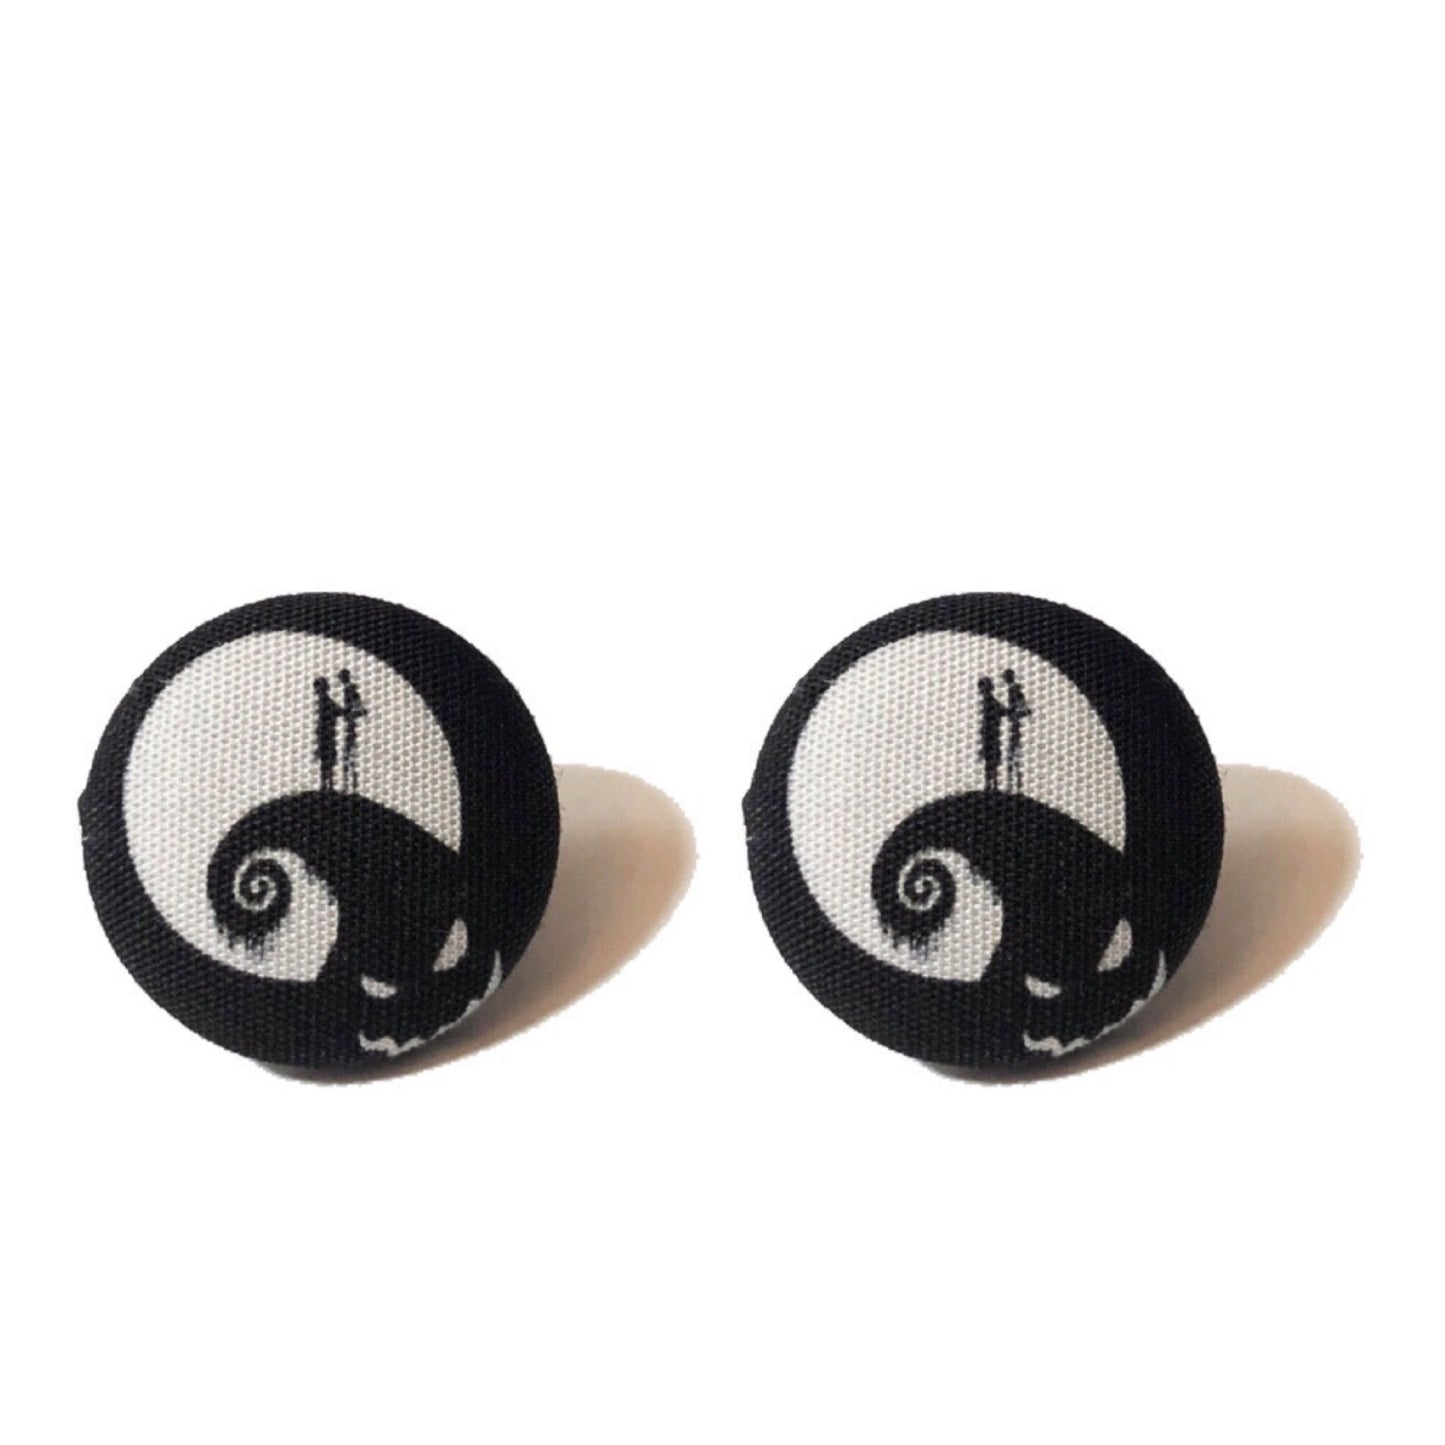 Jack & Sally Silhouette Fabric Button Earrings